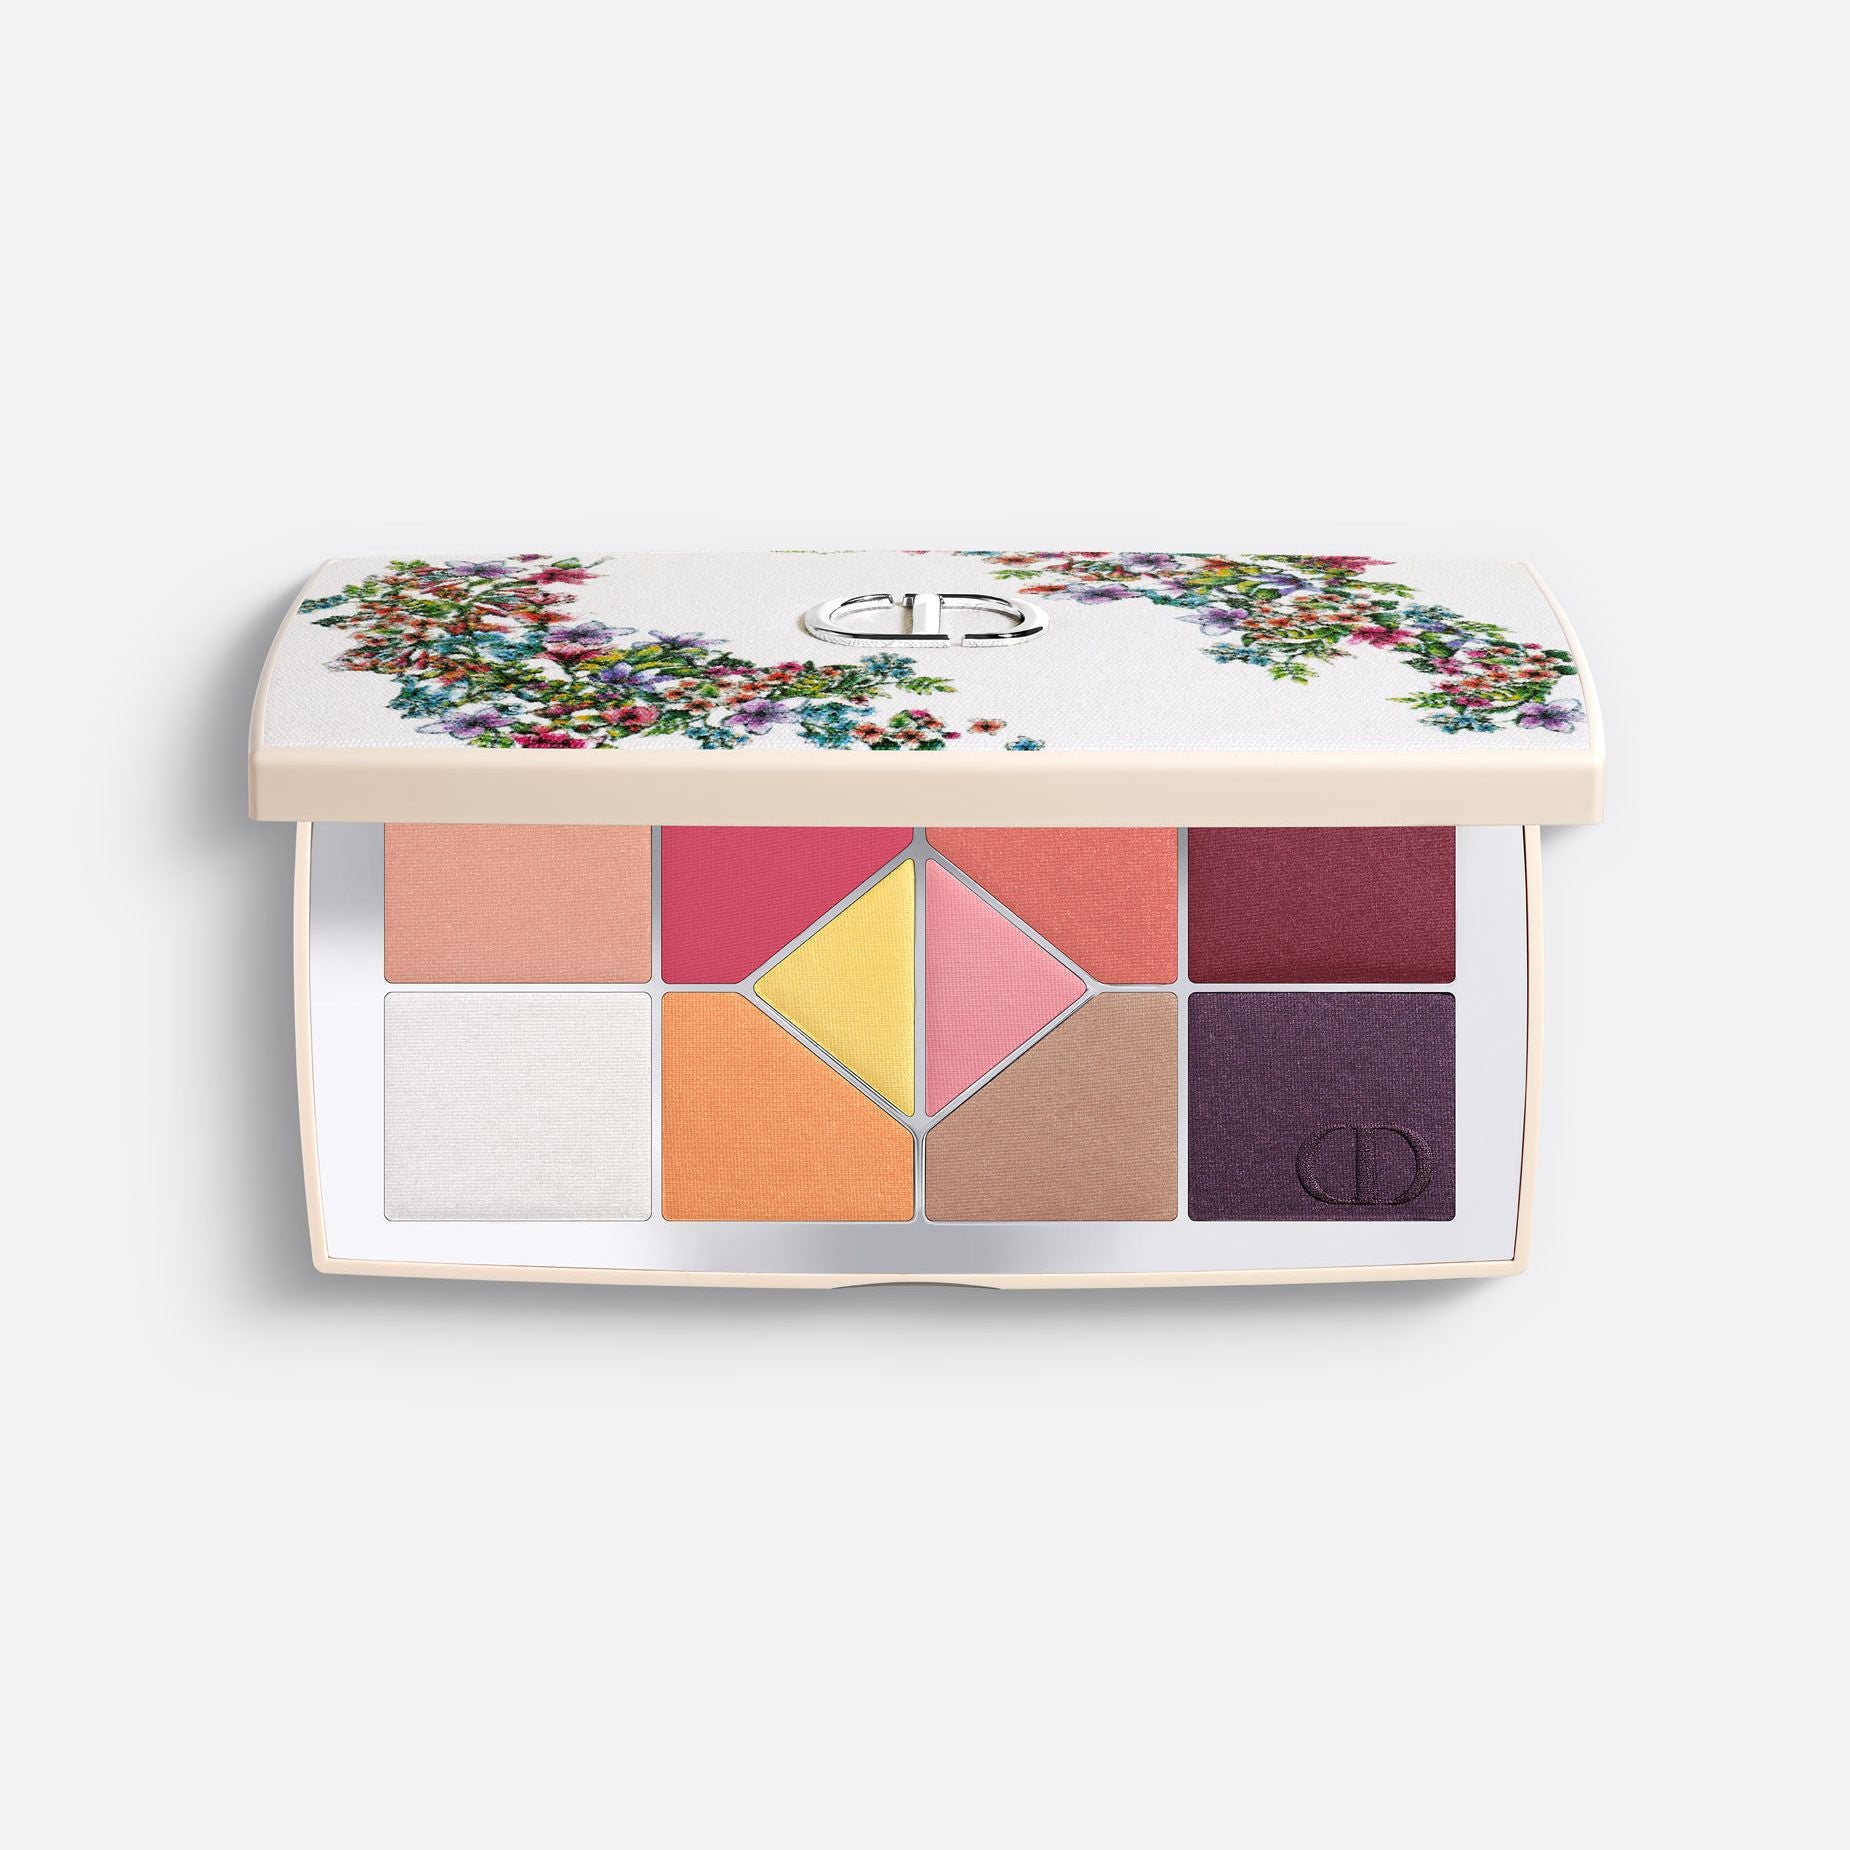 DIORSHOW 10 COULEURS - BLOOMING BOUDOIR LIMITED EDITION ~ Eye Palette - 10 Eyeshadows - High Color and Long Wear